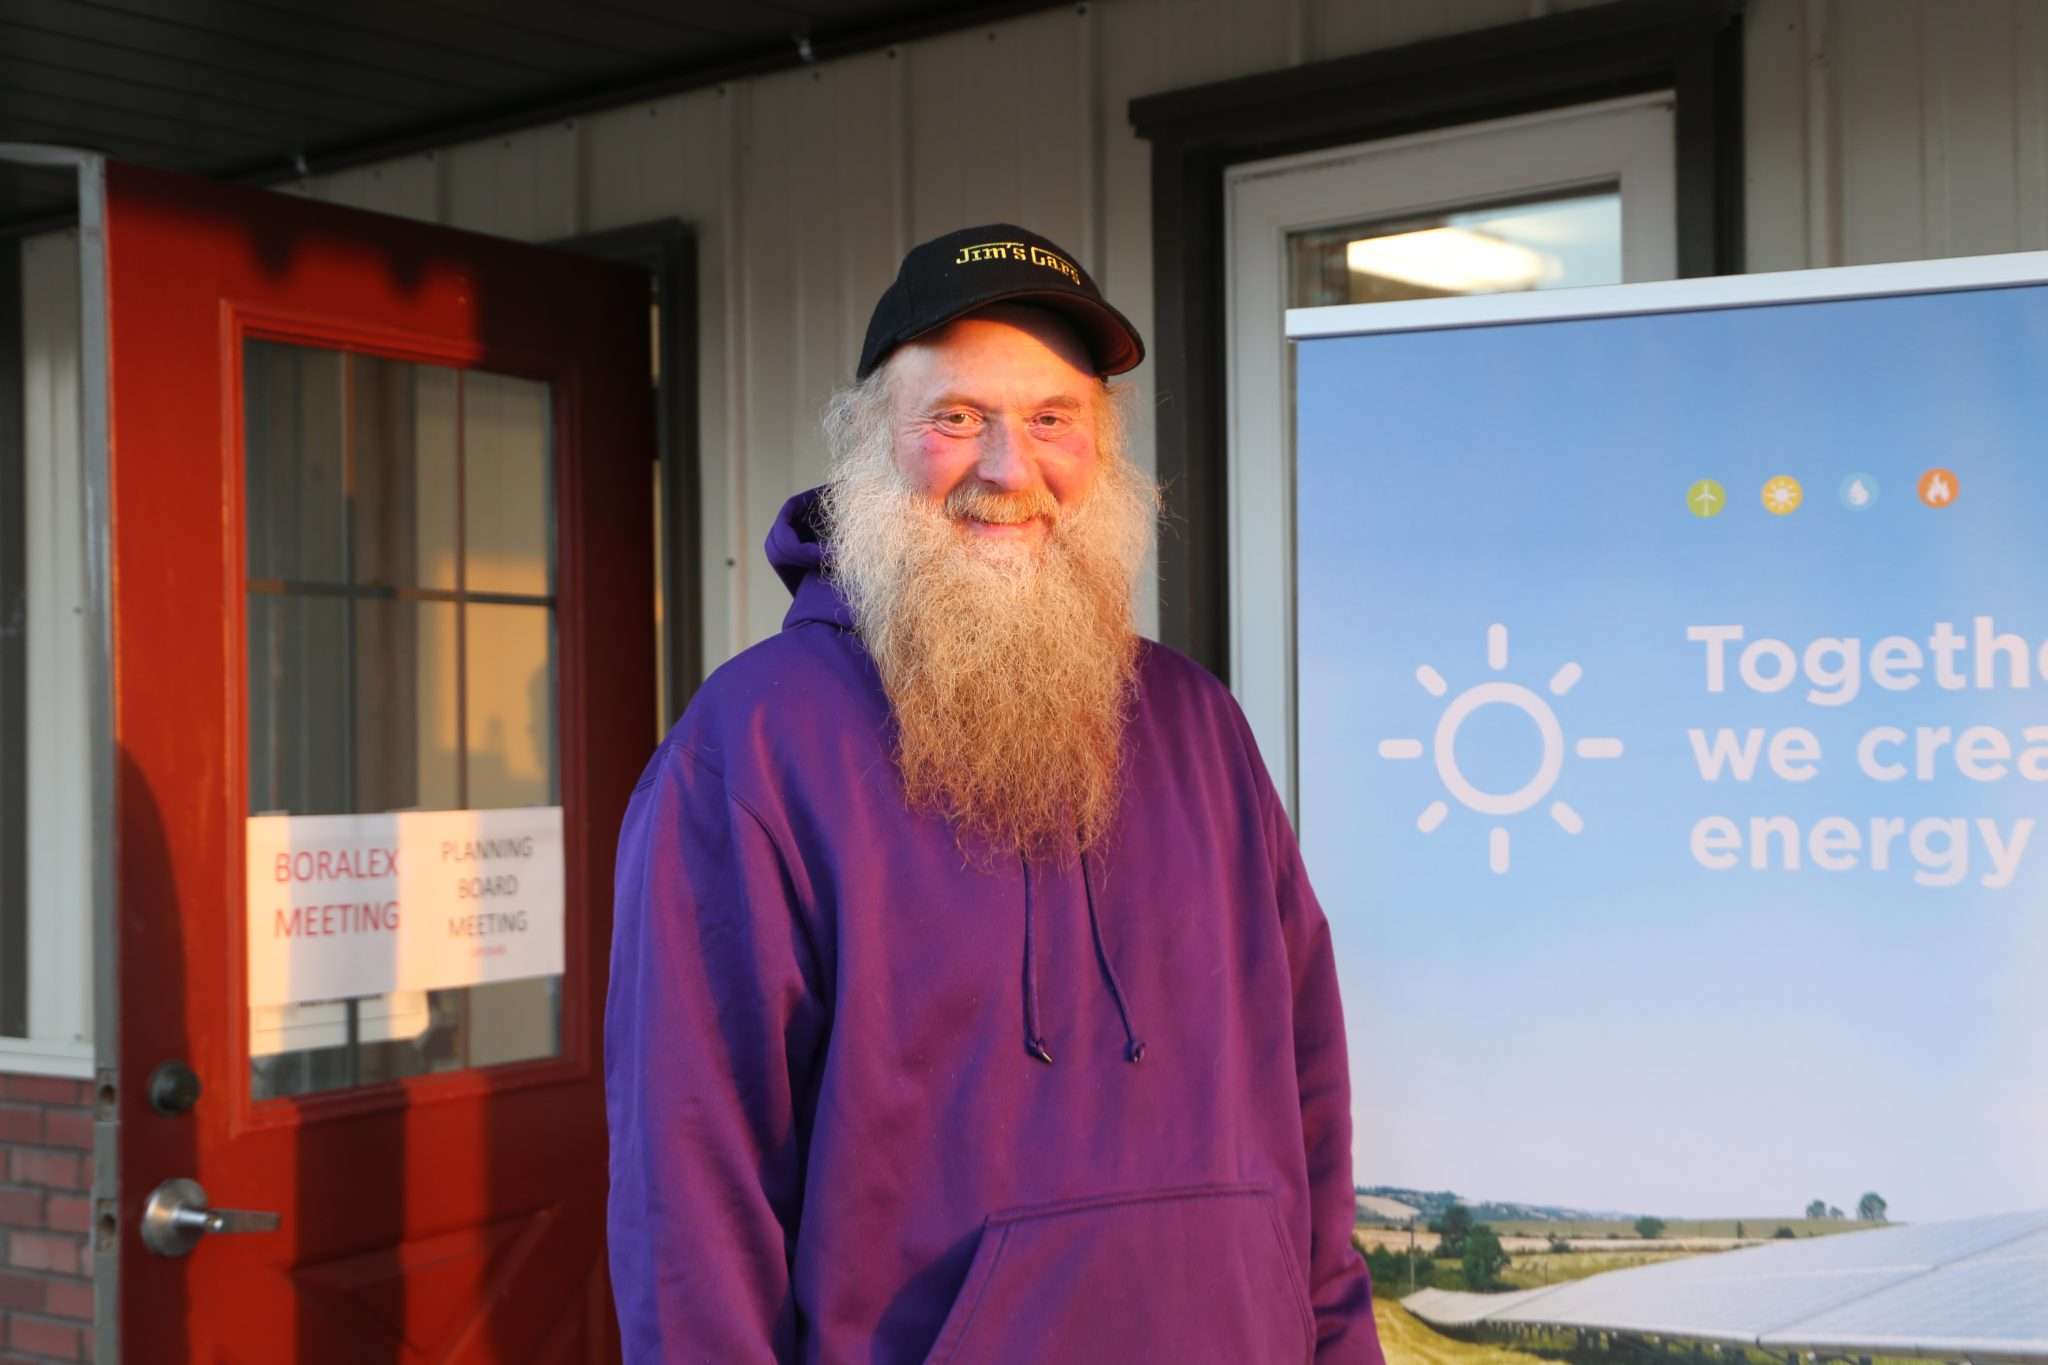 Jon Close, a farmer from Mayfield with a long beard and wearing a purple sweatshirt, stands outside the Mayfield Fire House.